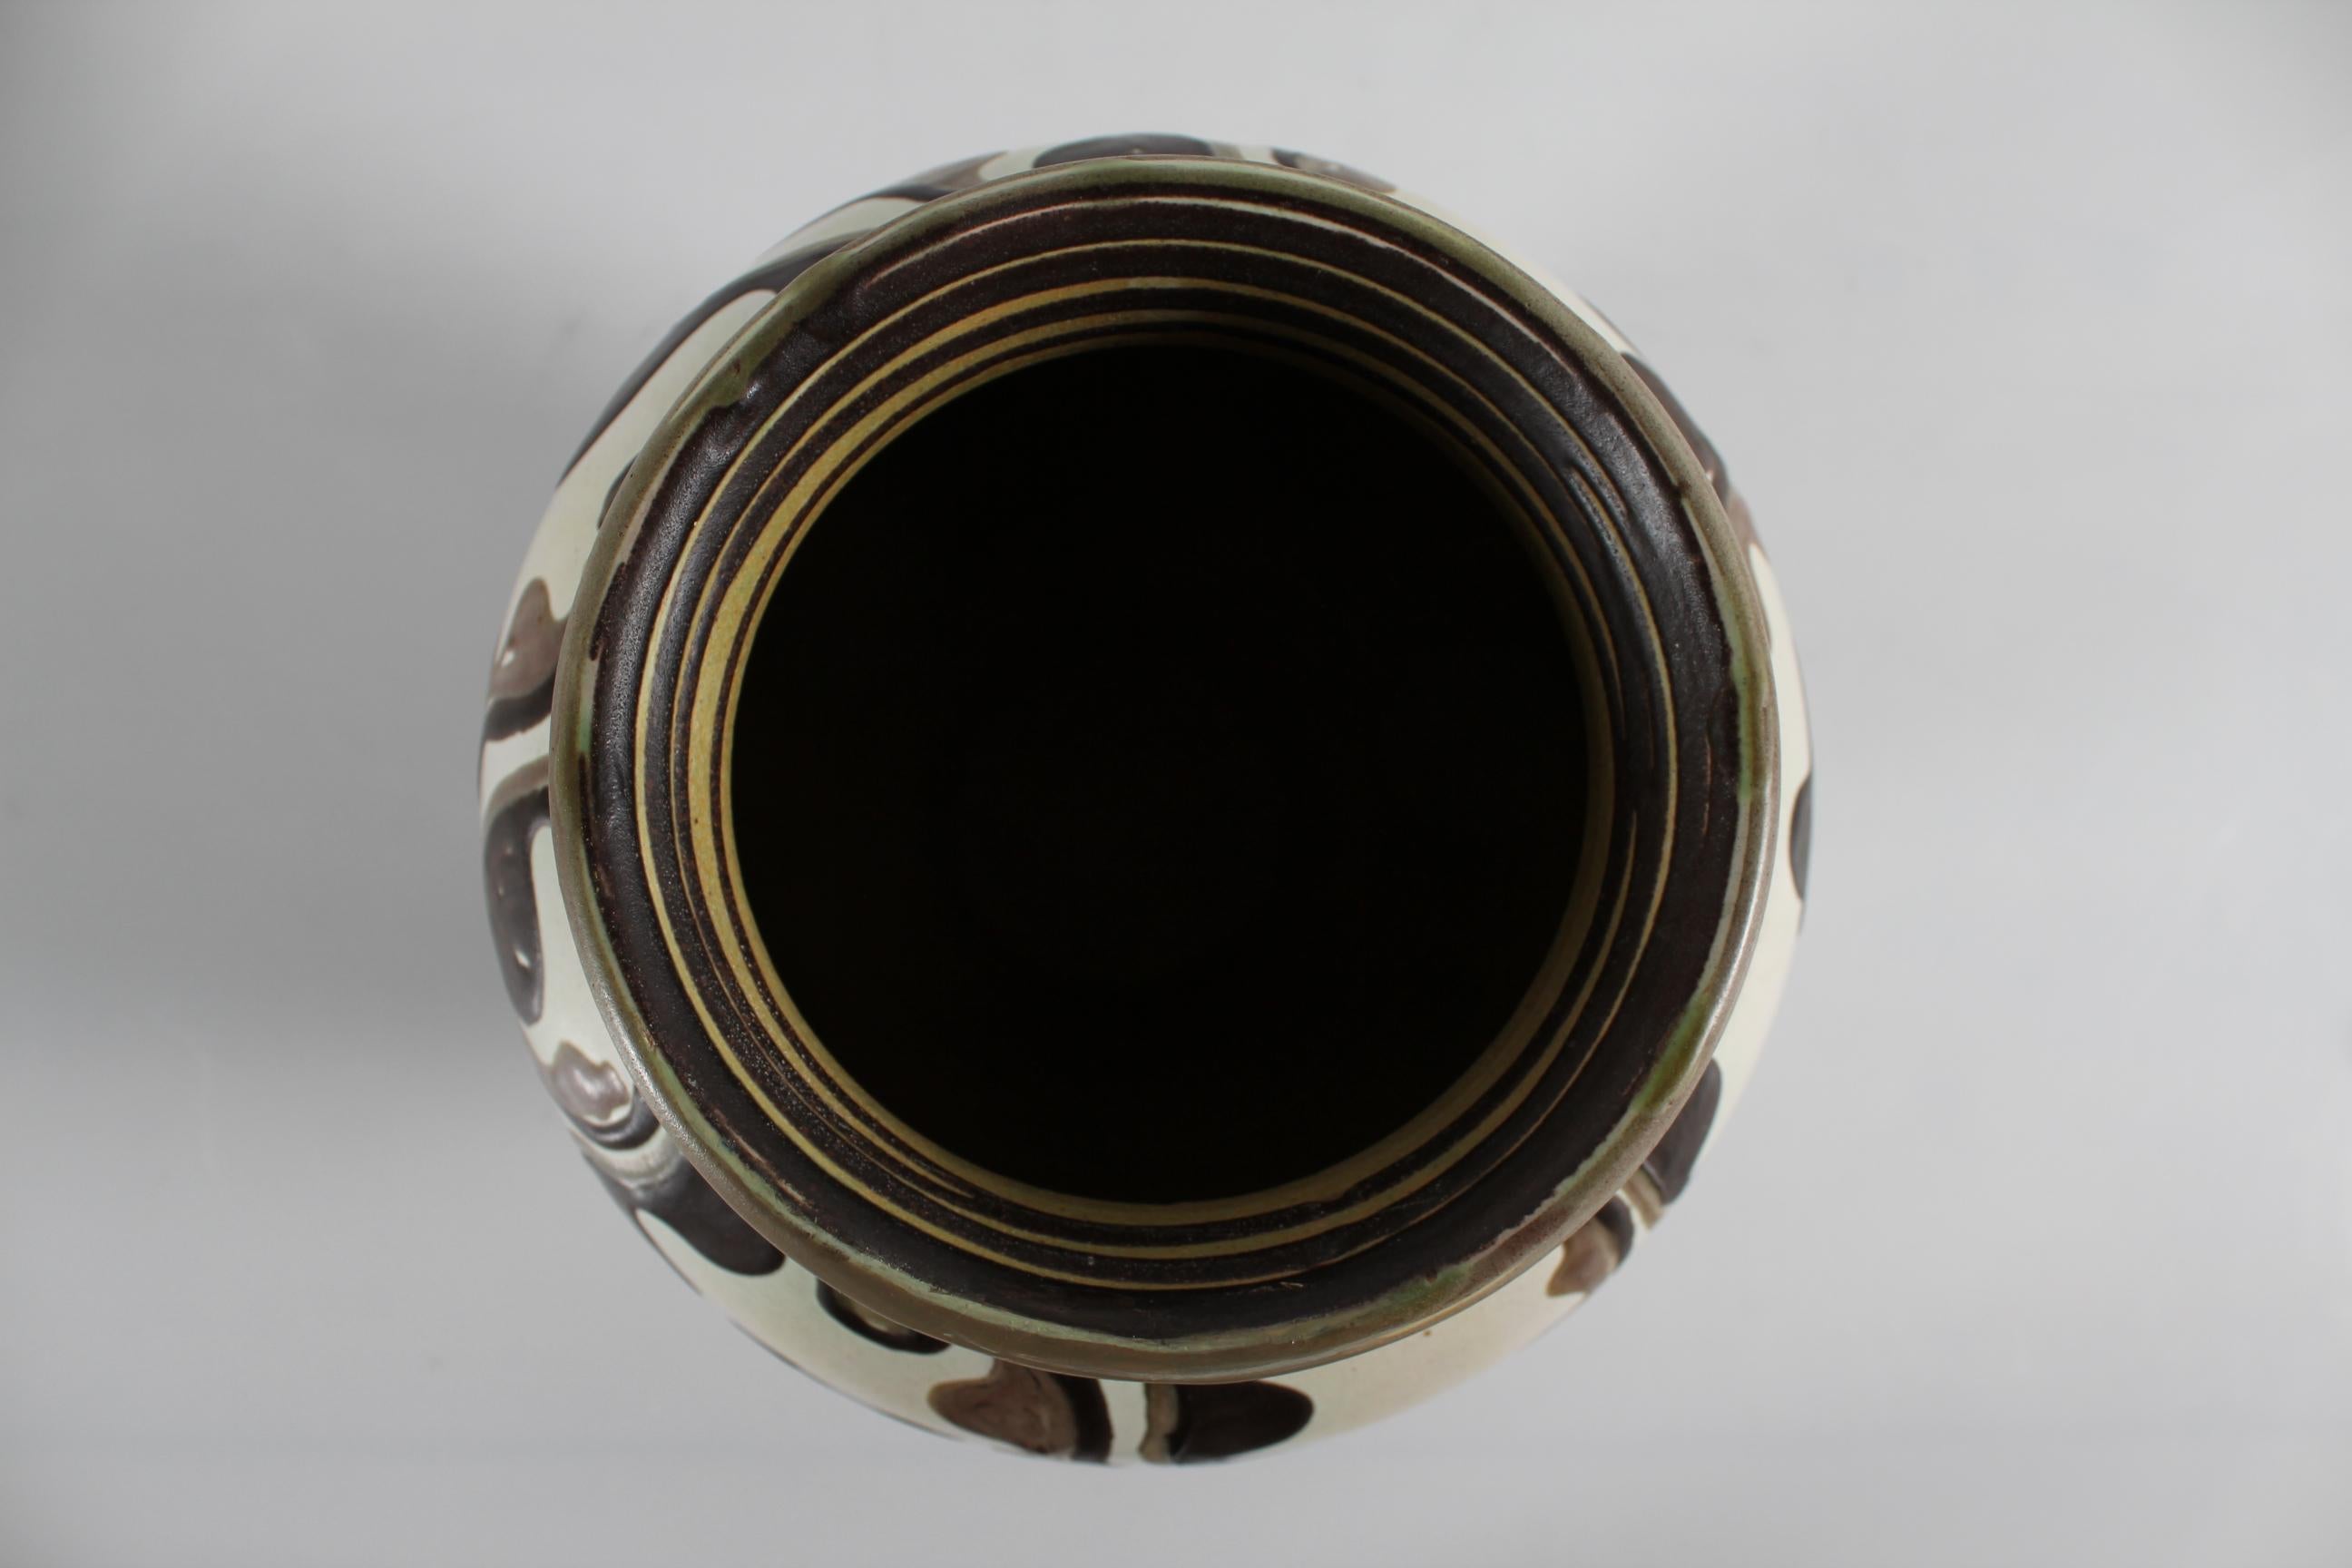 Danish Herman A Kähler Ceramic Vase with Abstract Pattern, Early 20th Century For Sale